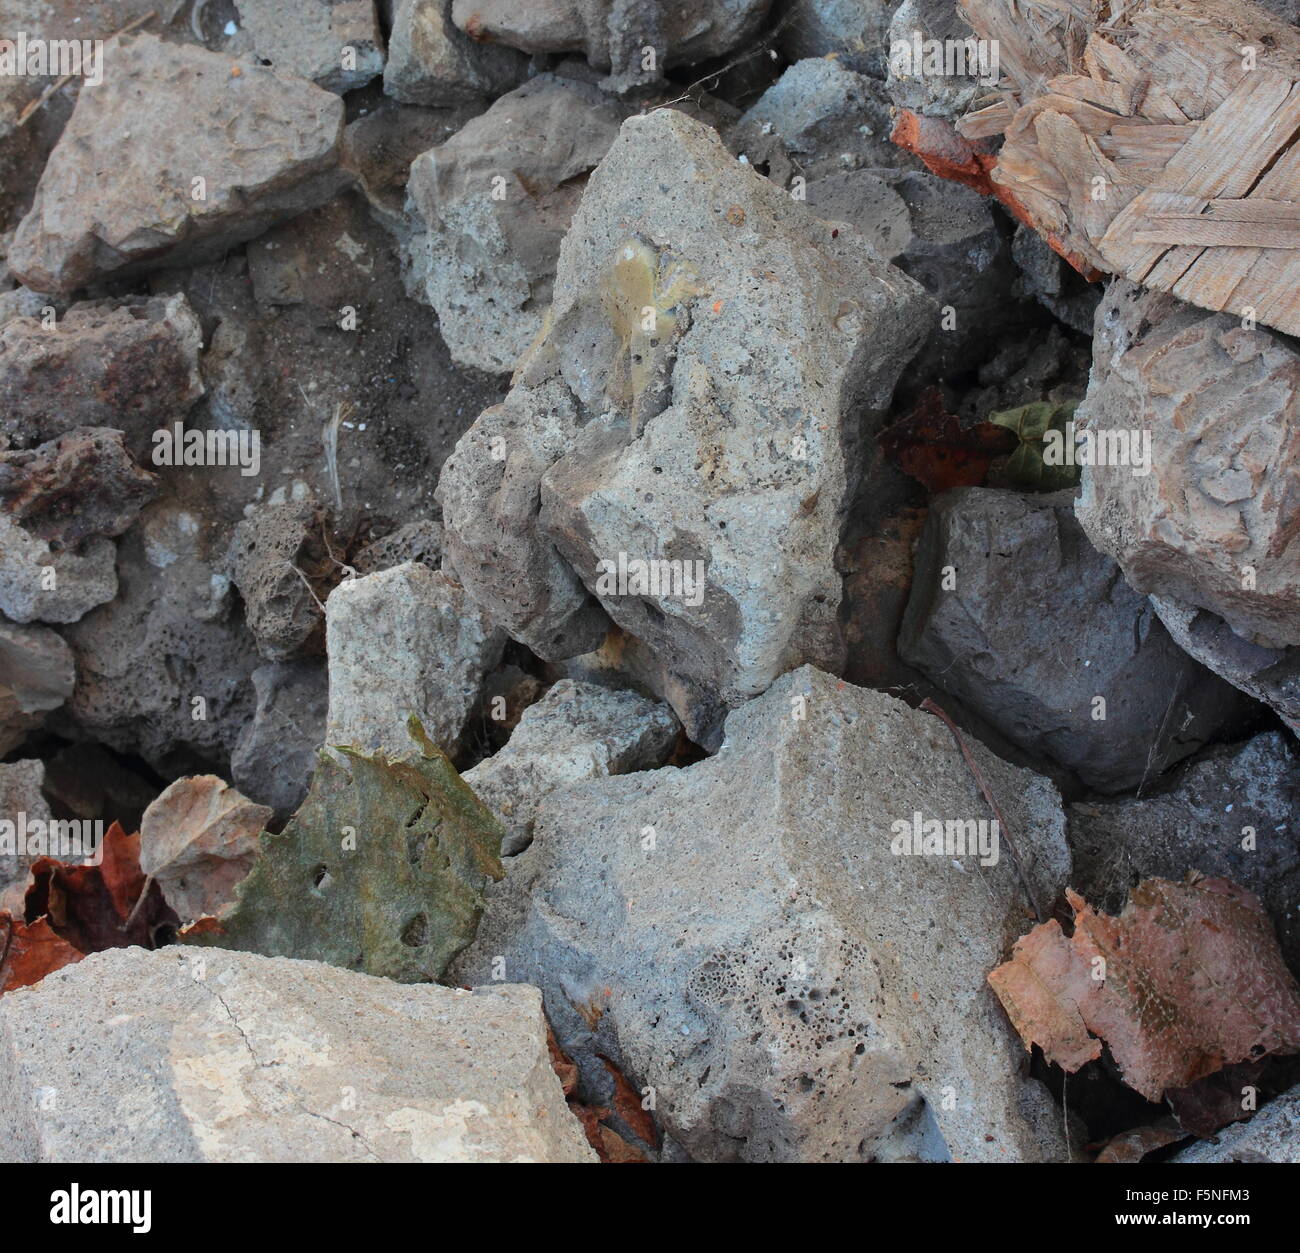 It is a pile of stones of different shapes Stock Photo